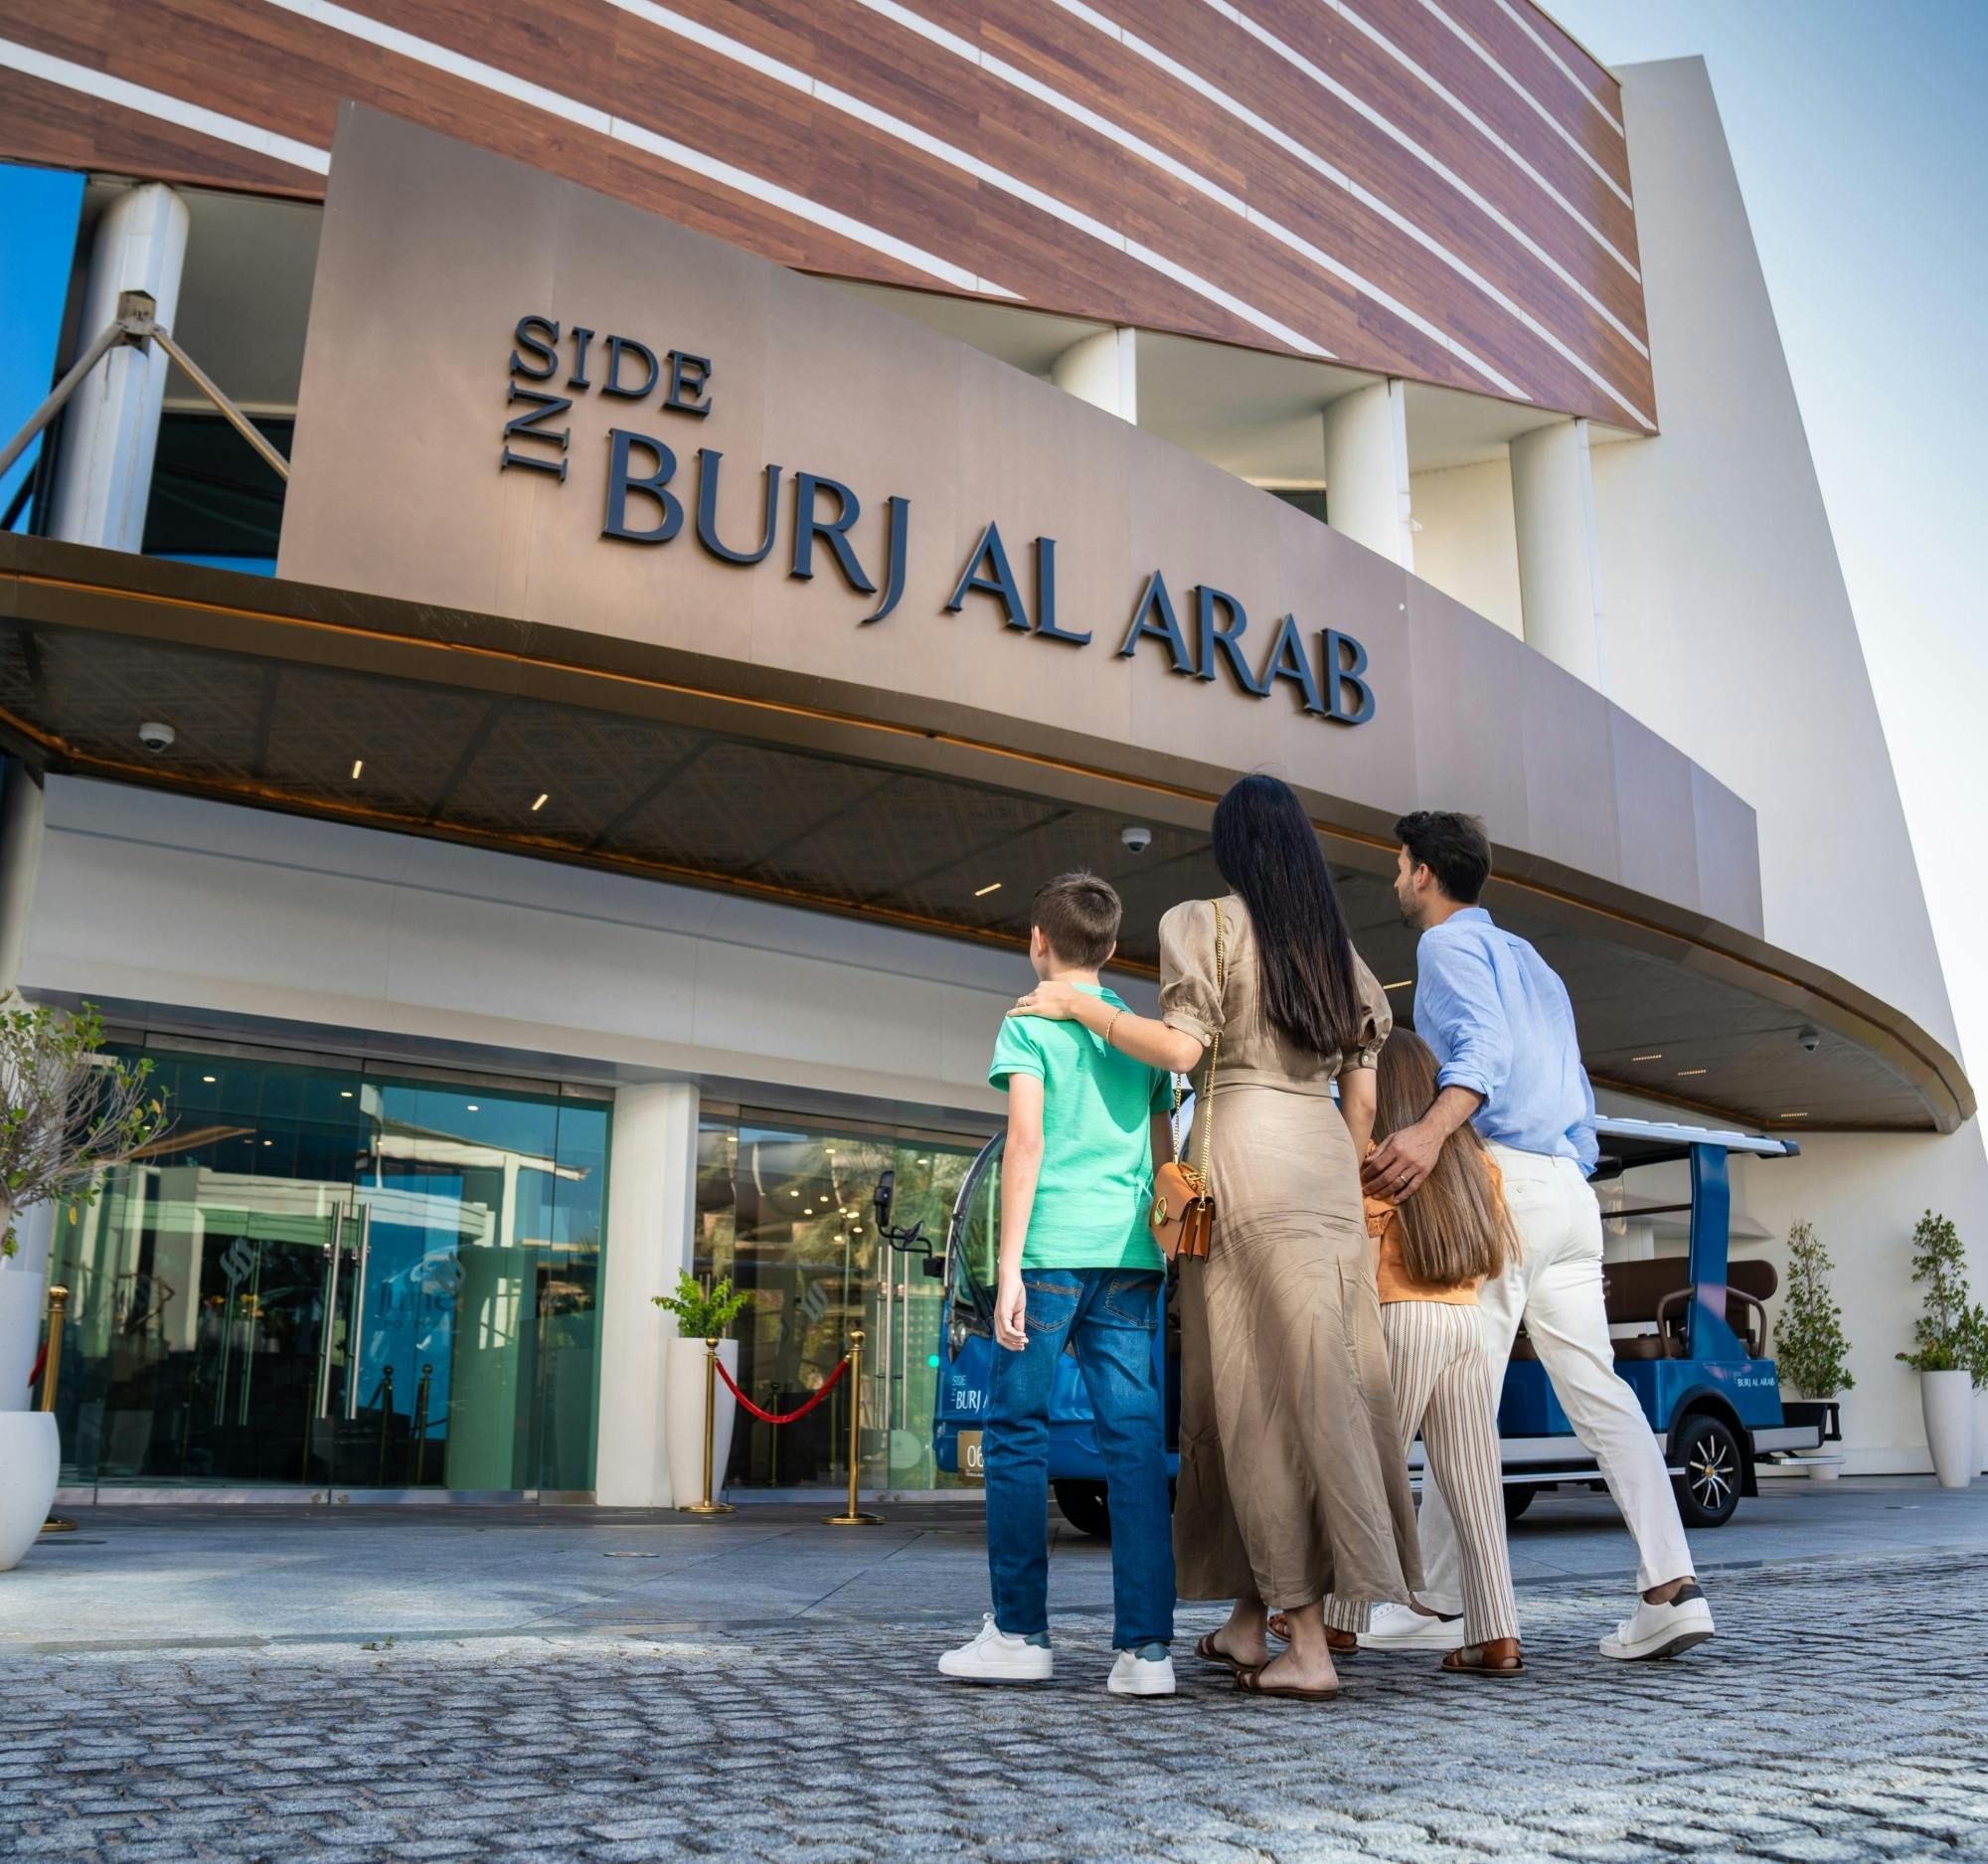 Tour of Burj al Arab with optional food and beverages at UMA Lounge |  musement